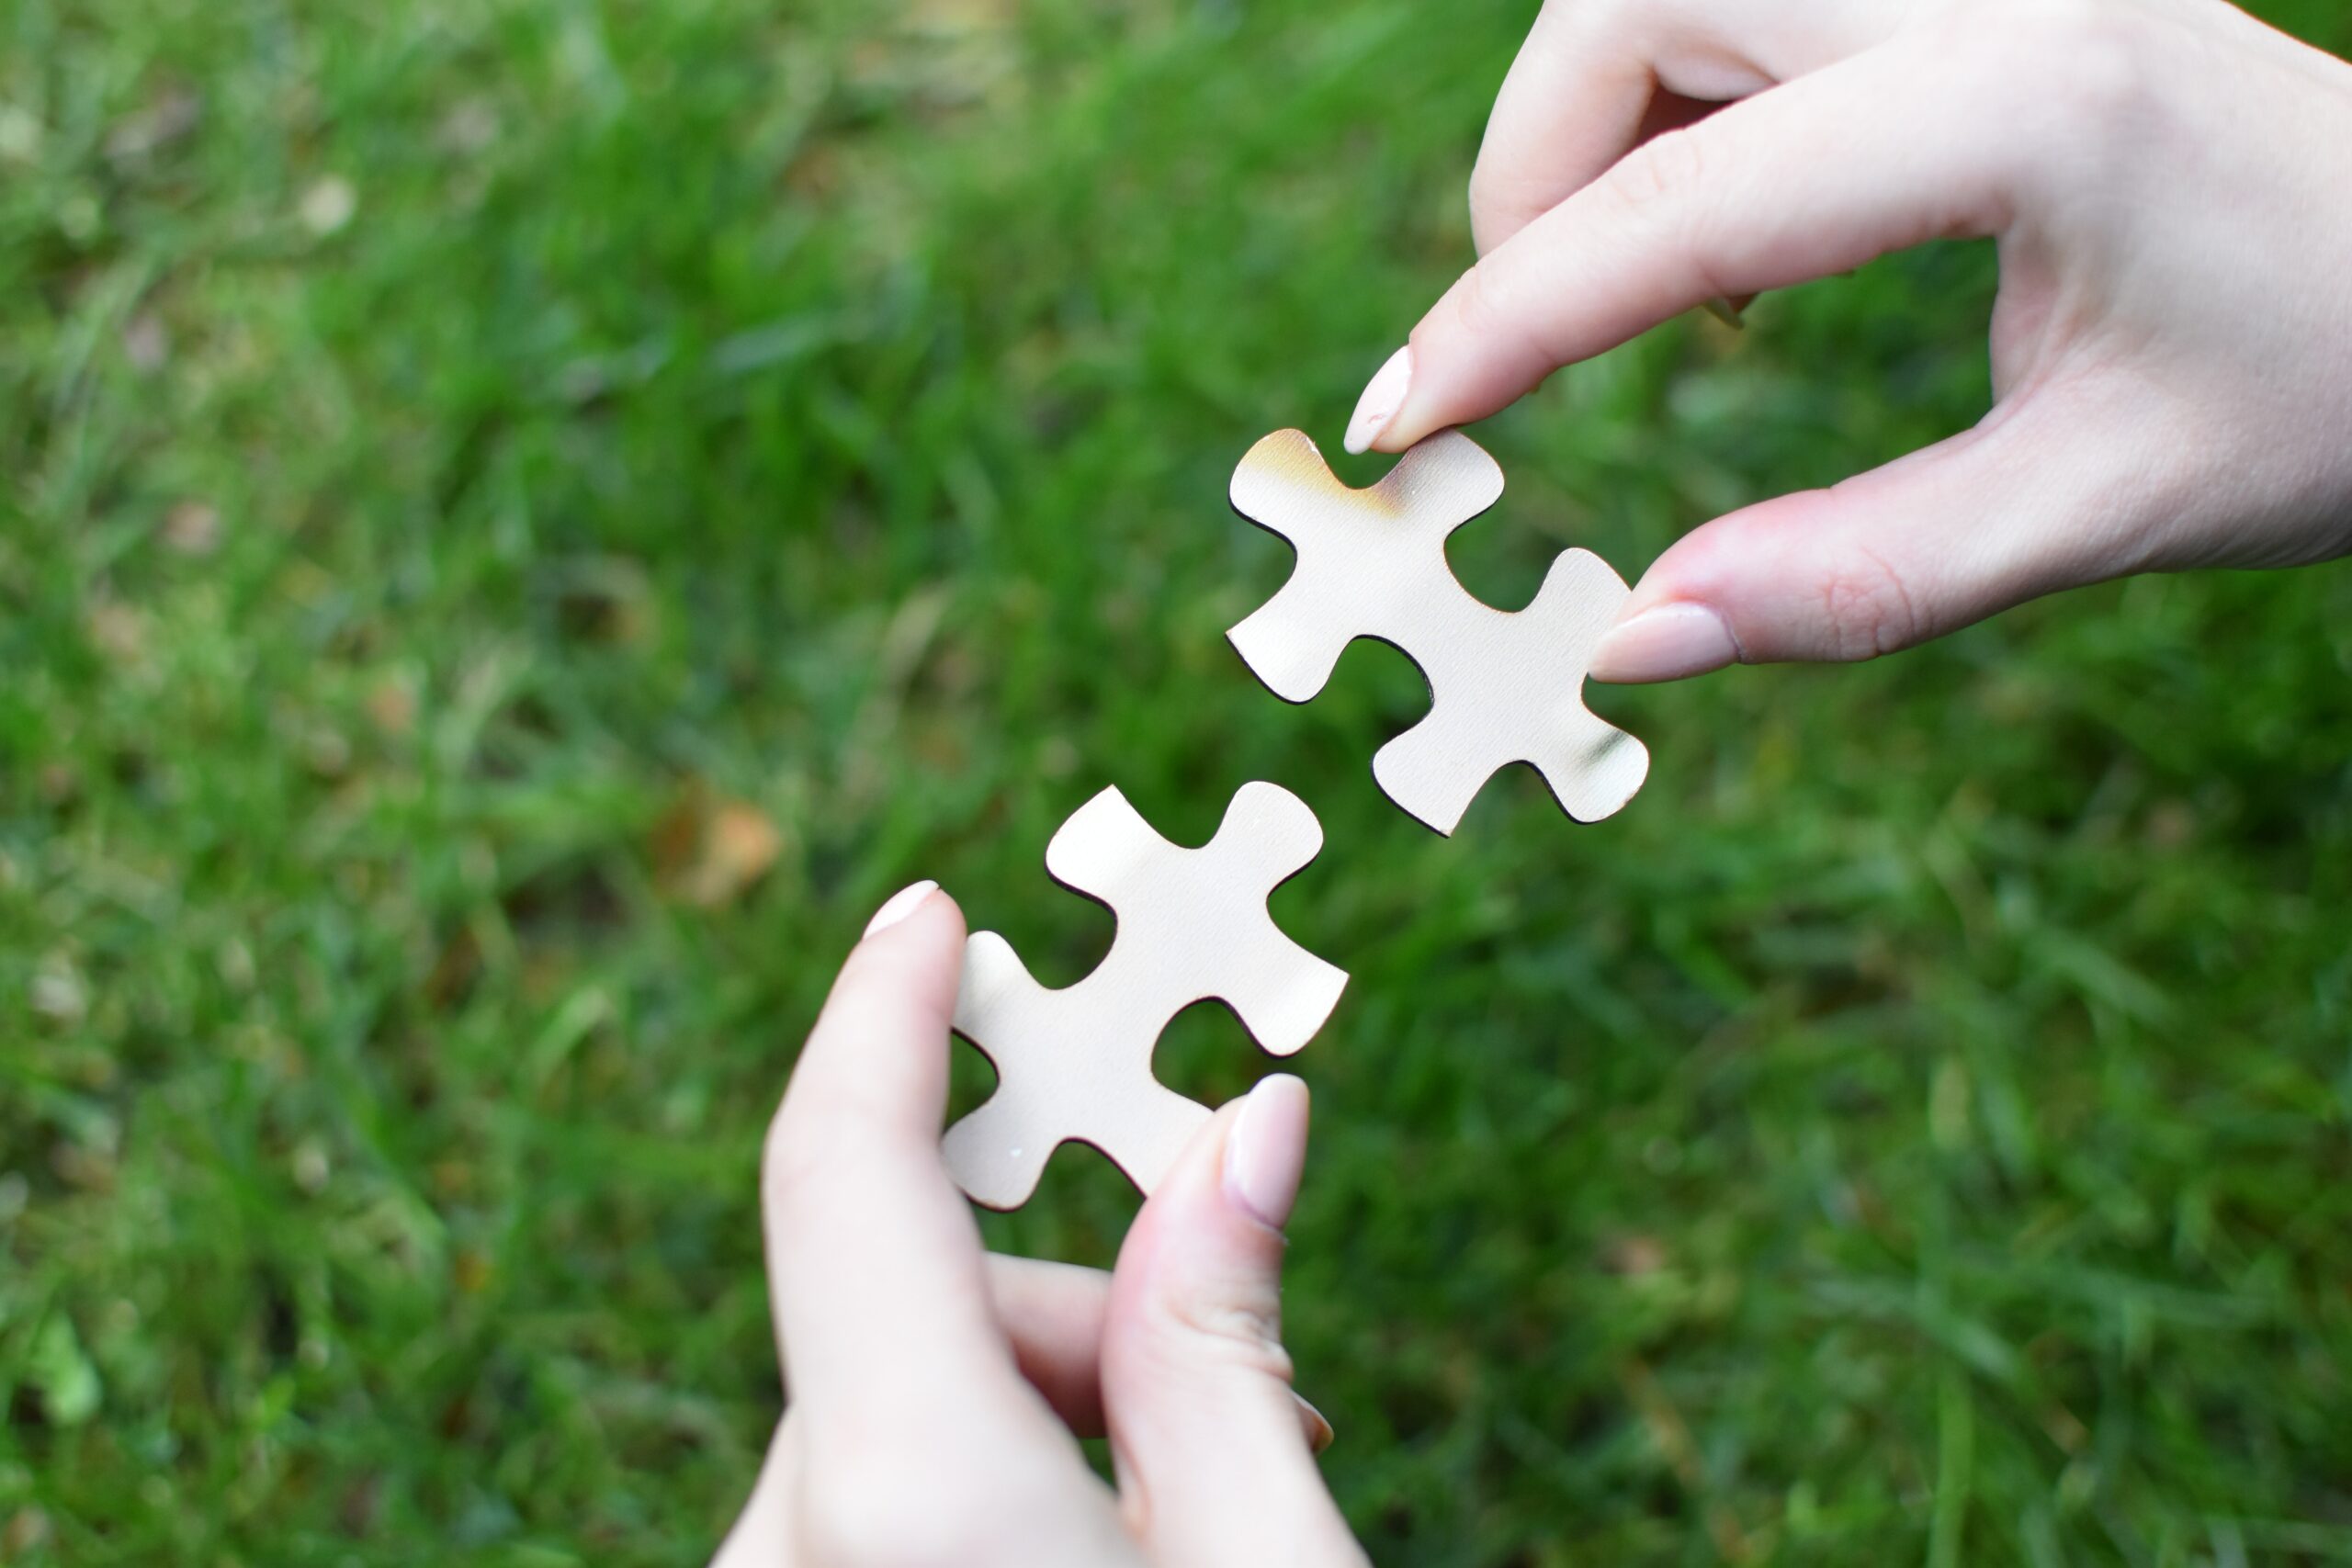 A person's hands holding two puzzle pieces close together above green grass.